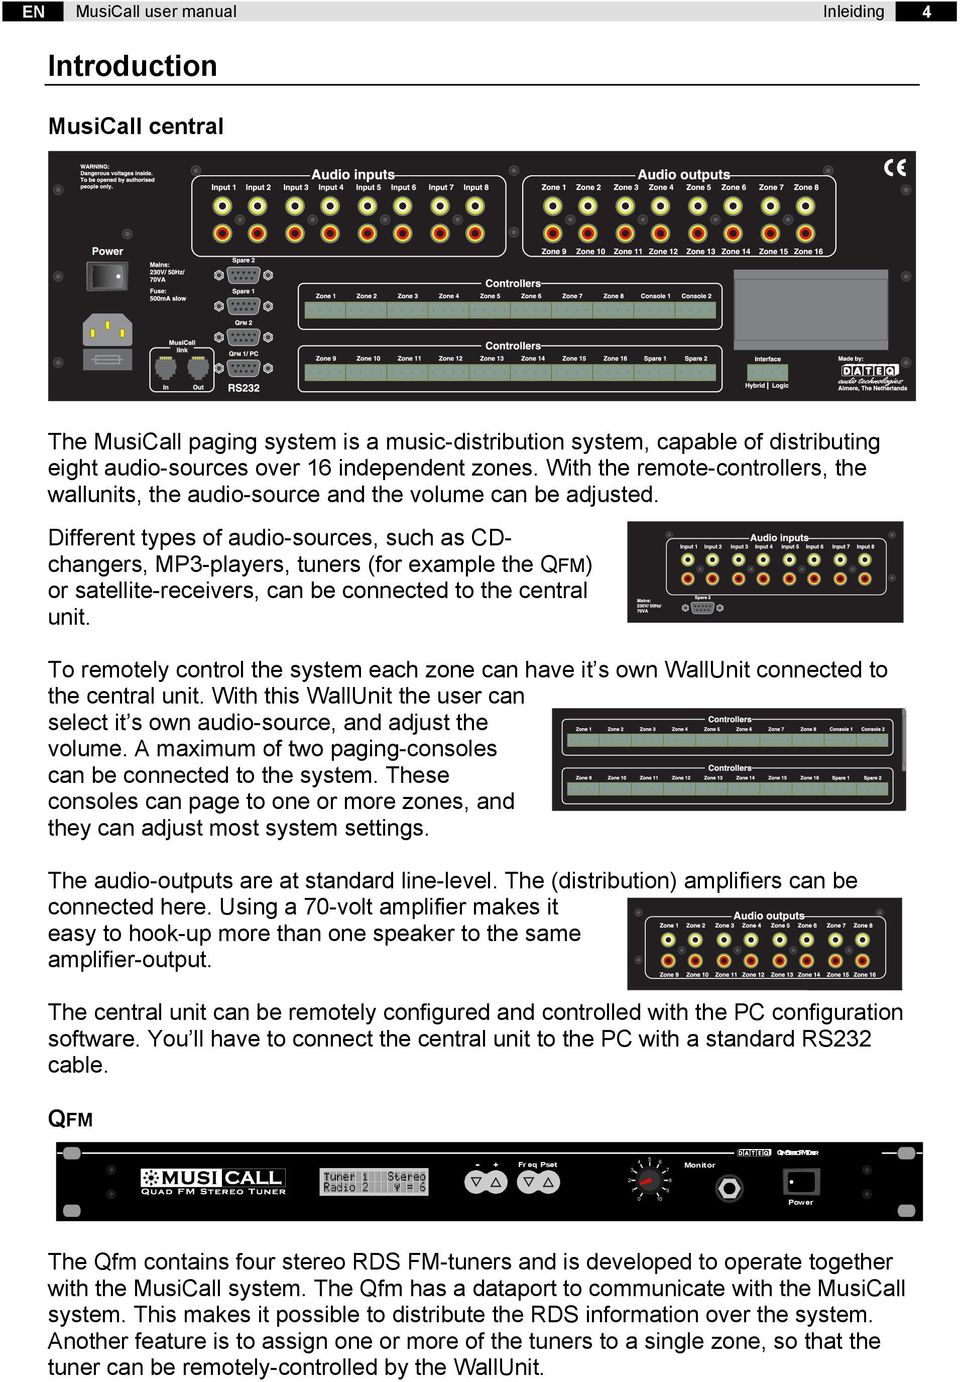 Different types of audio-sources, such as CDchangers, MP3-players, tuners (for example the QFM) or satellite-receivers, can be connected to the central unit.